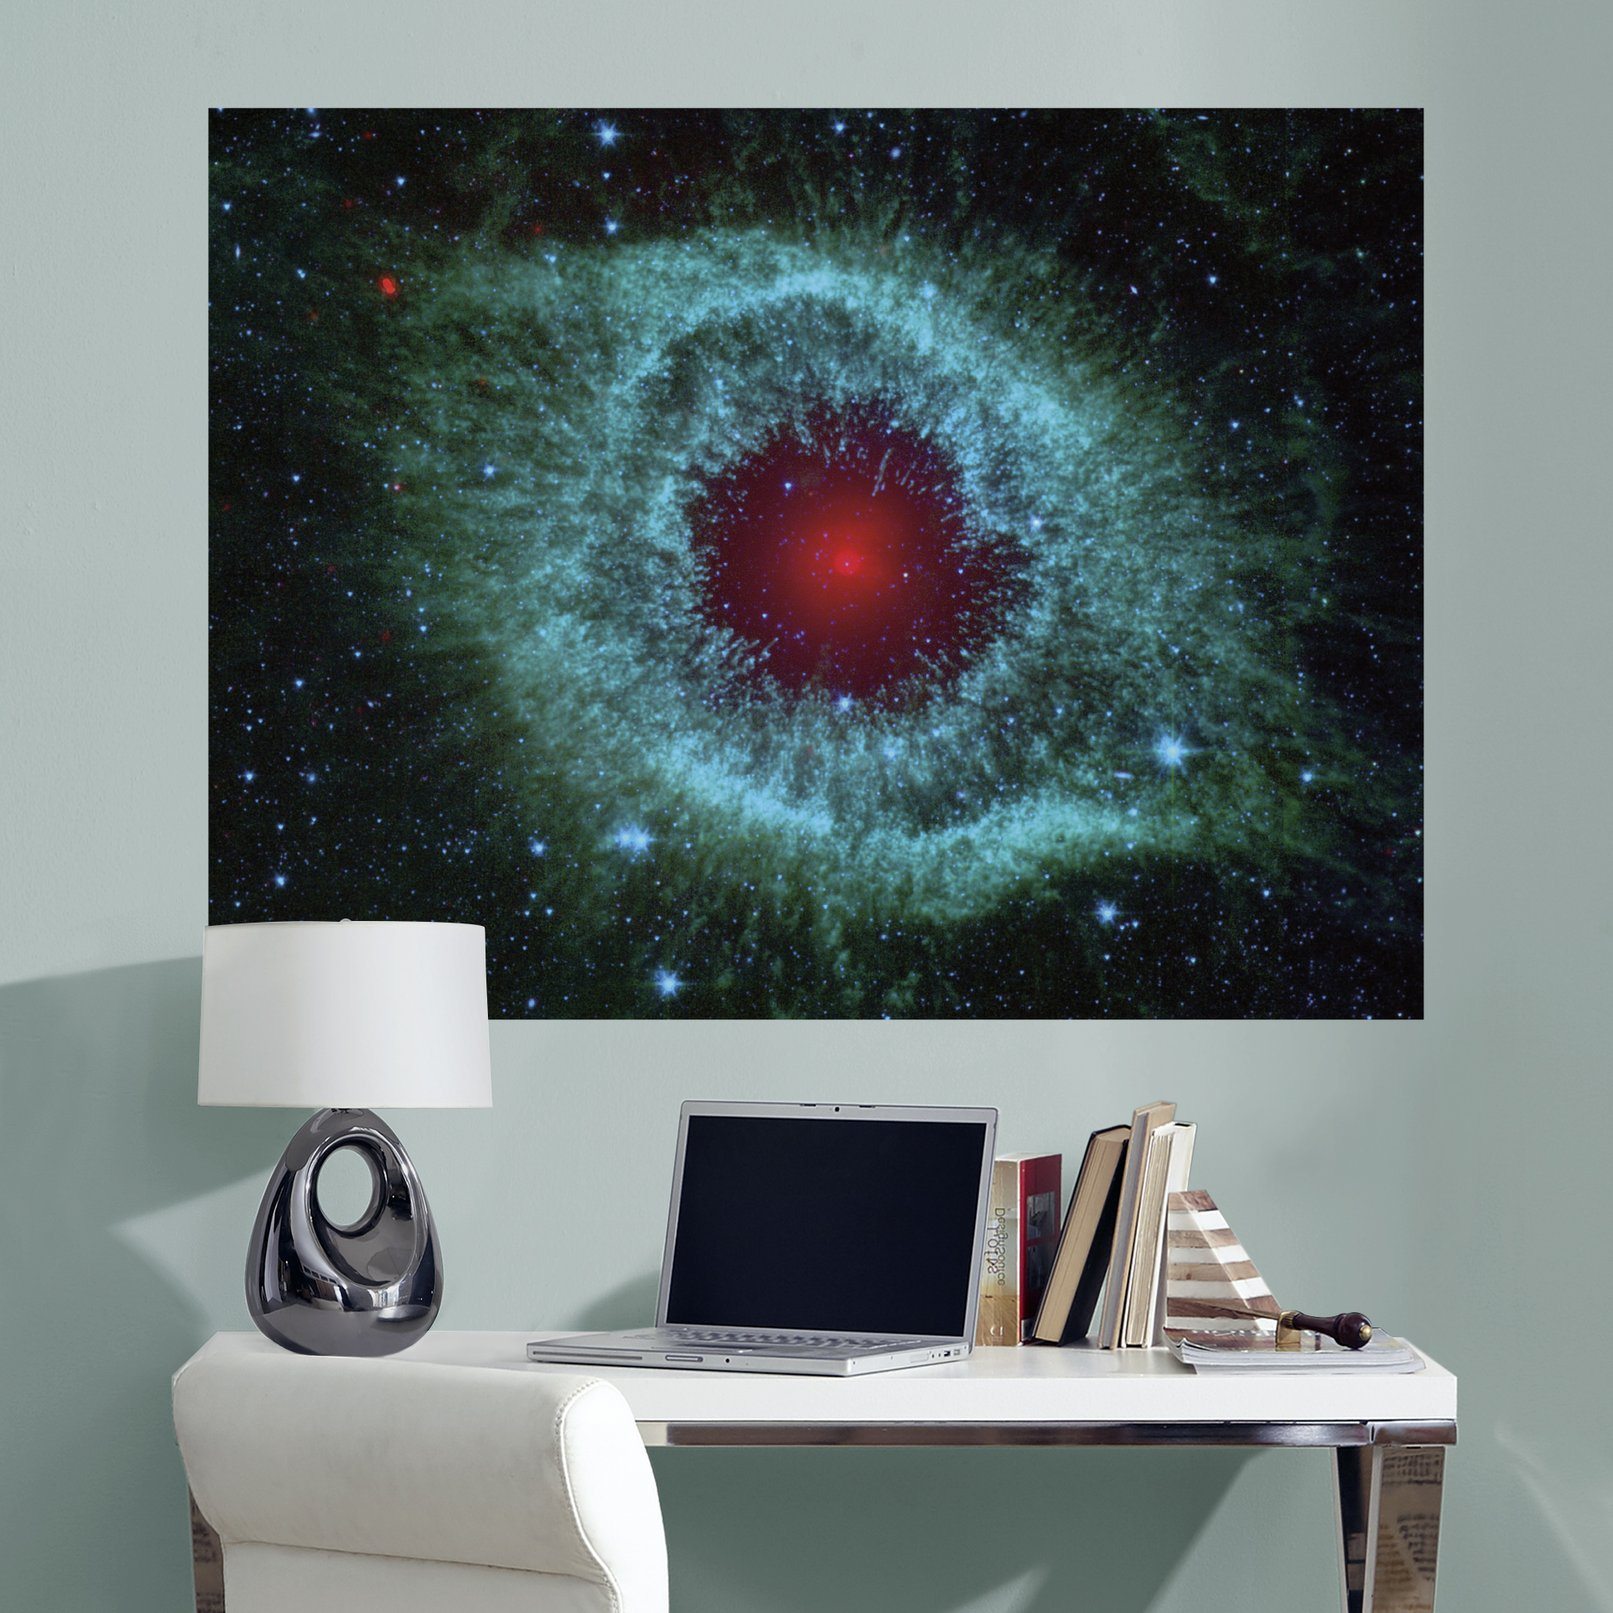 https://fathead.com/collections/space-exploration/products/m1019-00022?variant=33141967159384